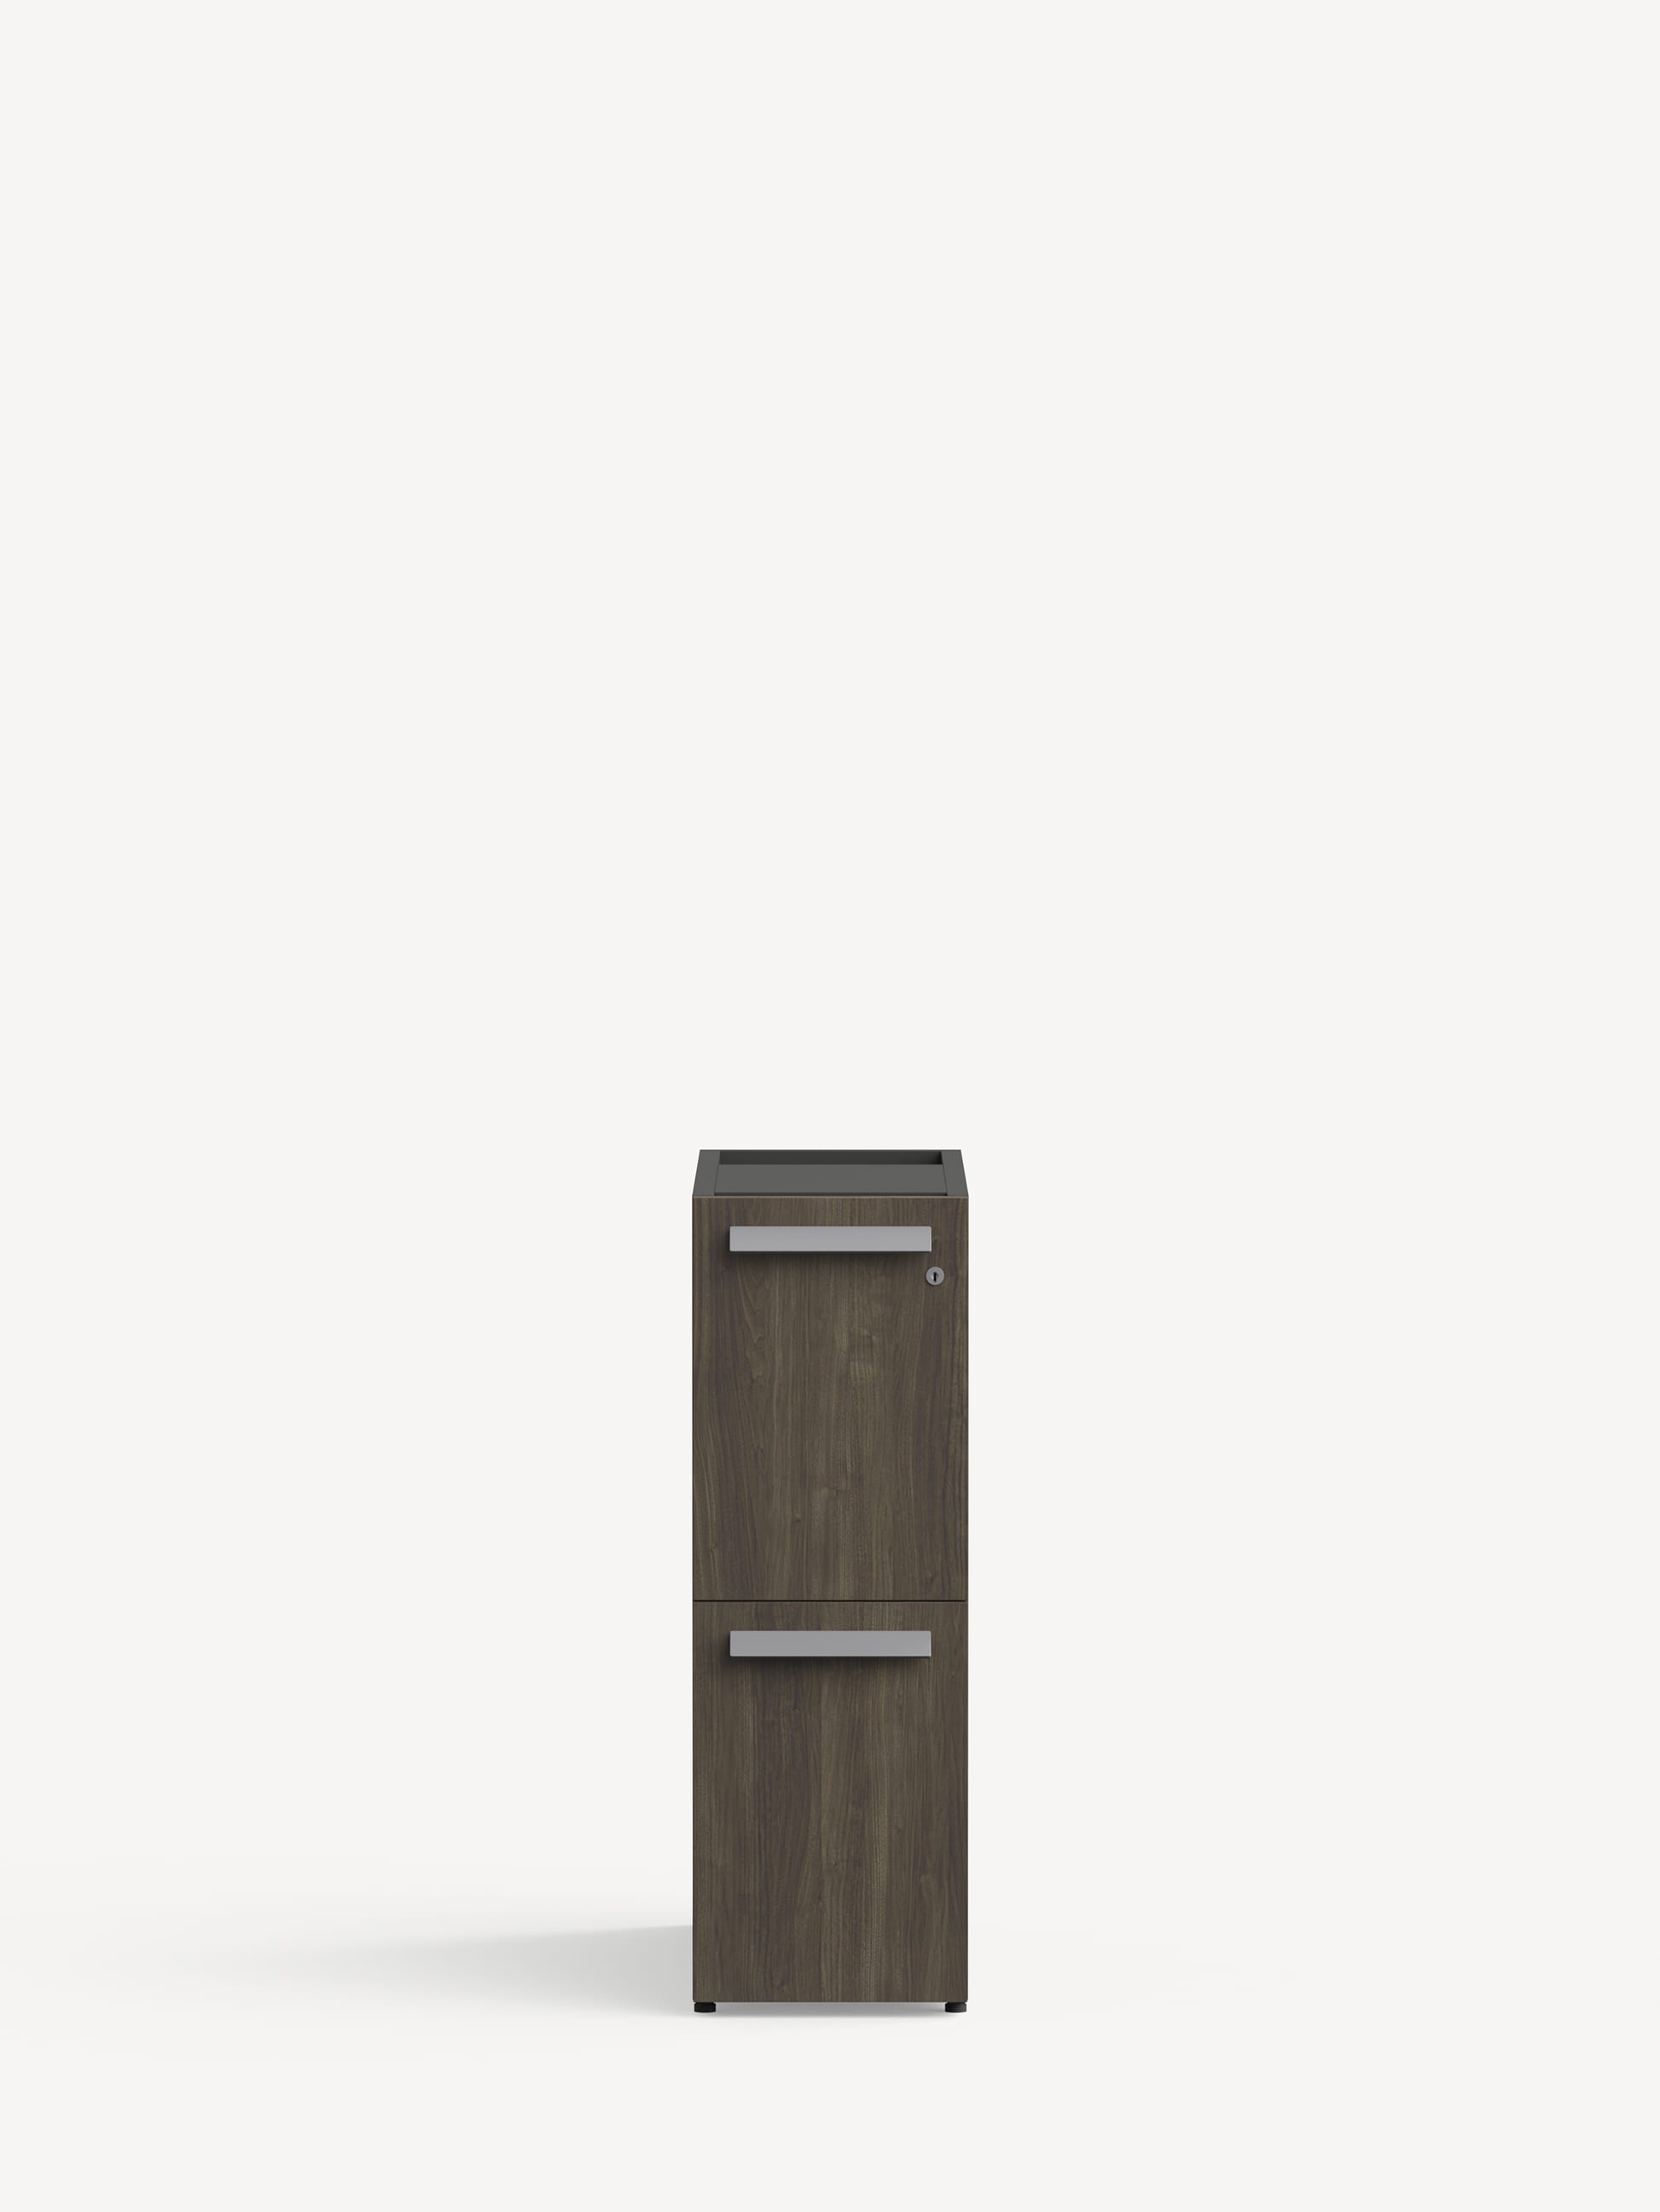 Approach Slim File Pedestal in dark brownish grey wood with two file drawers and silver handles.